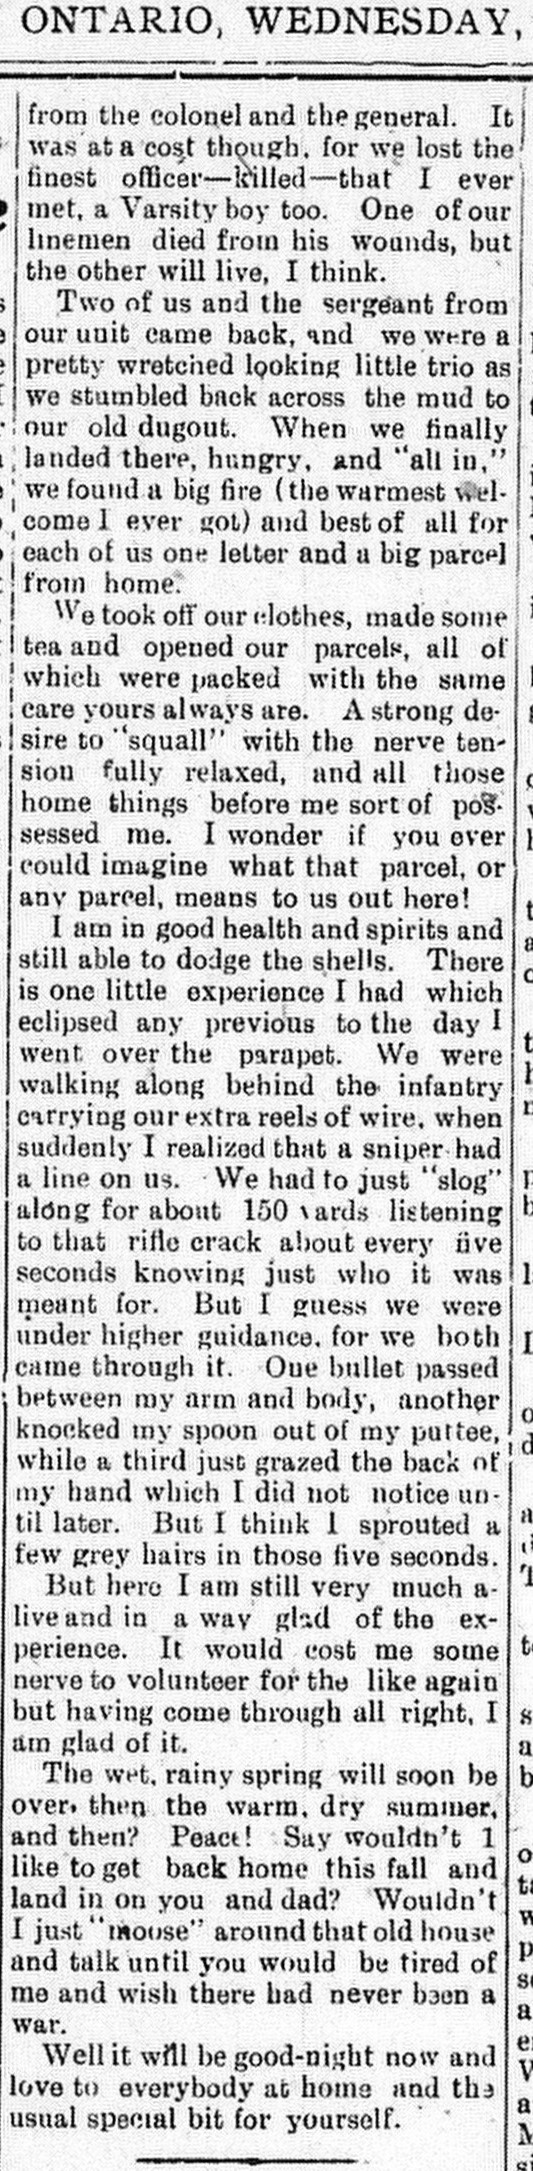 Canadian Echo, May 30, 1917, p. 1, part 2 of 2